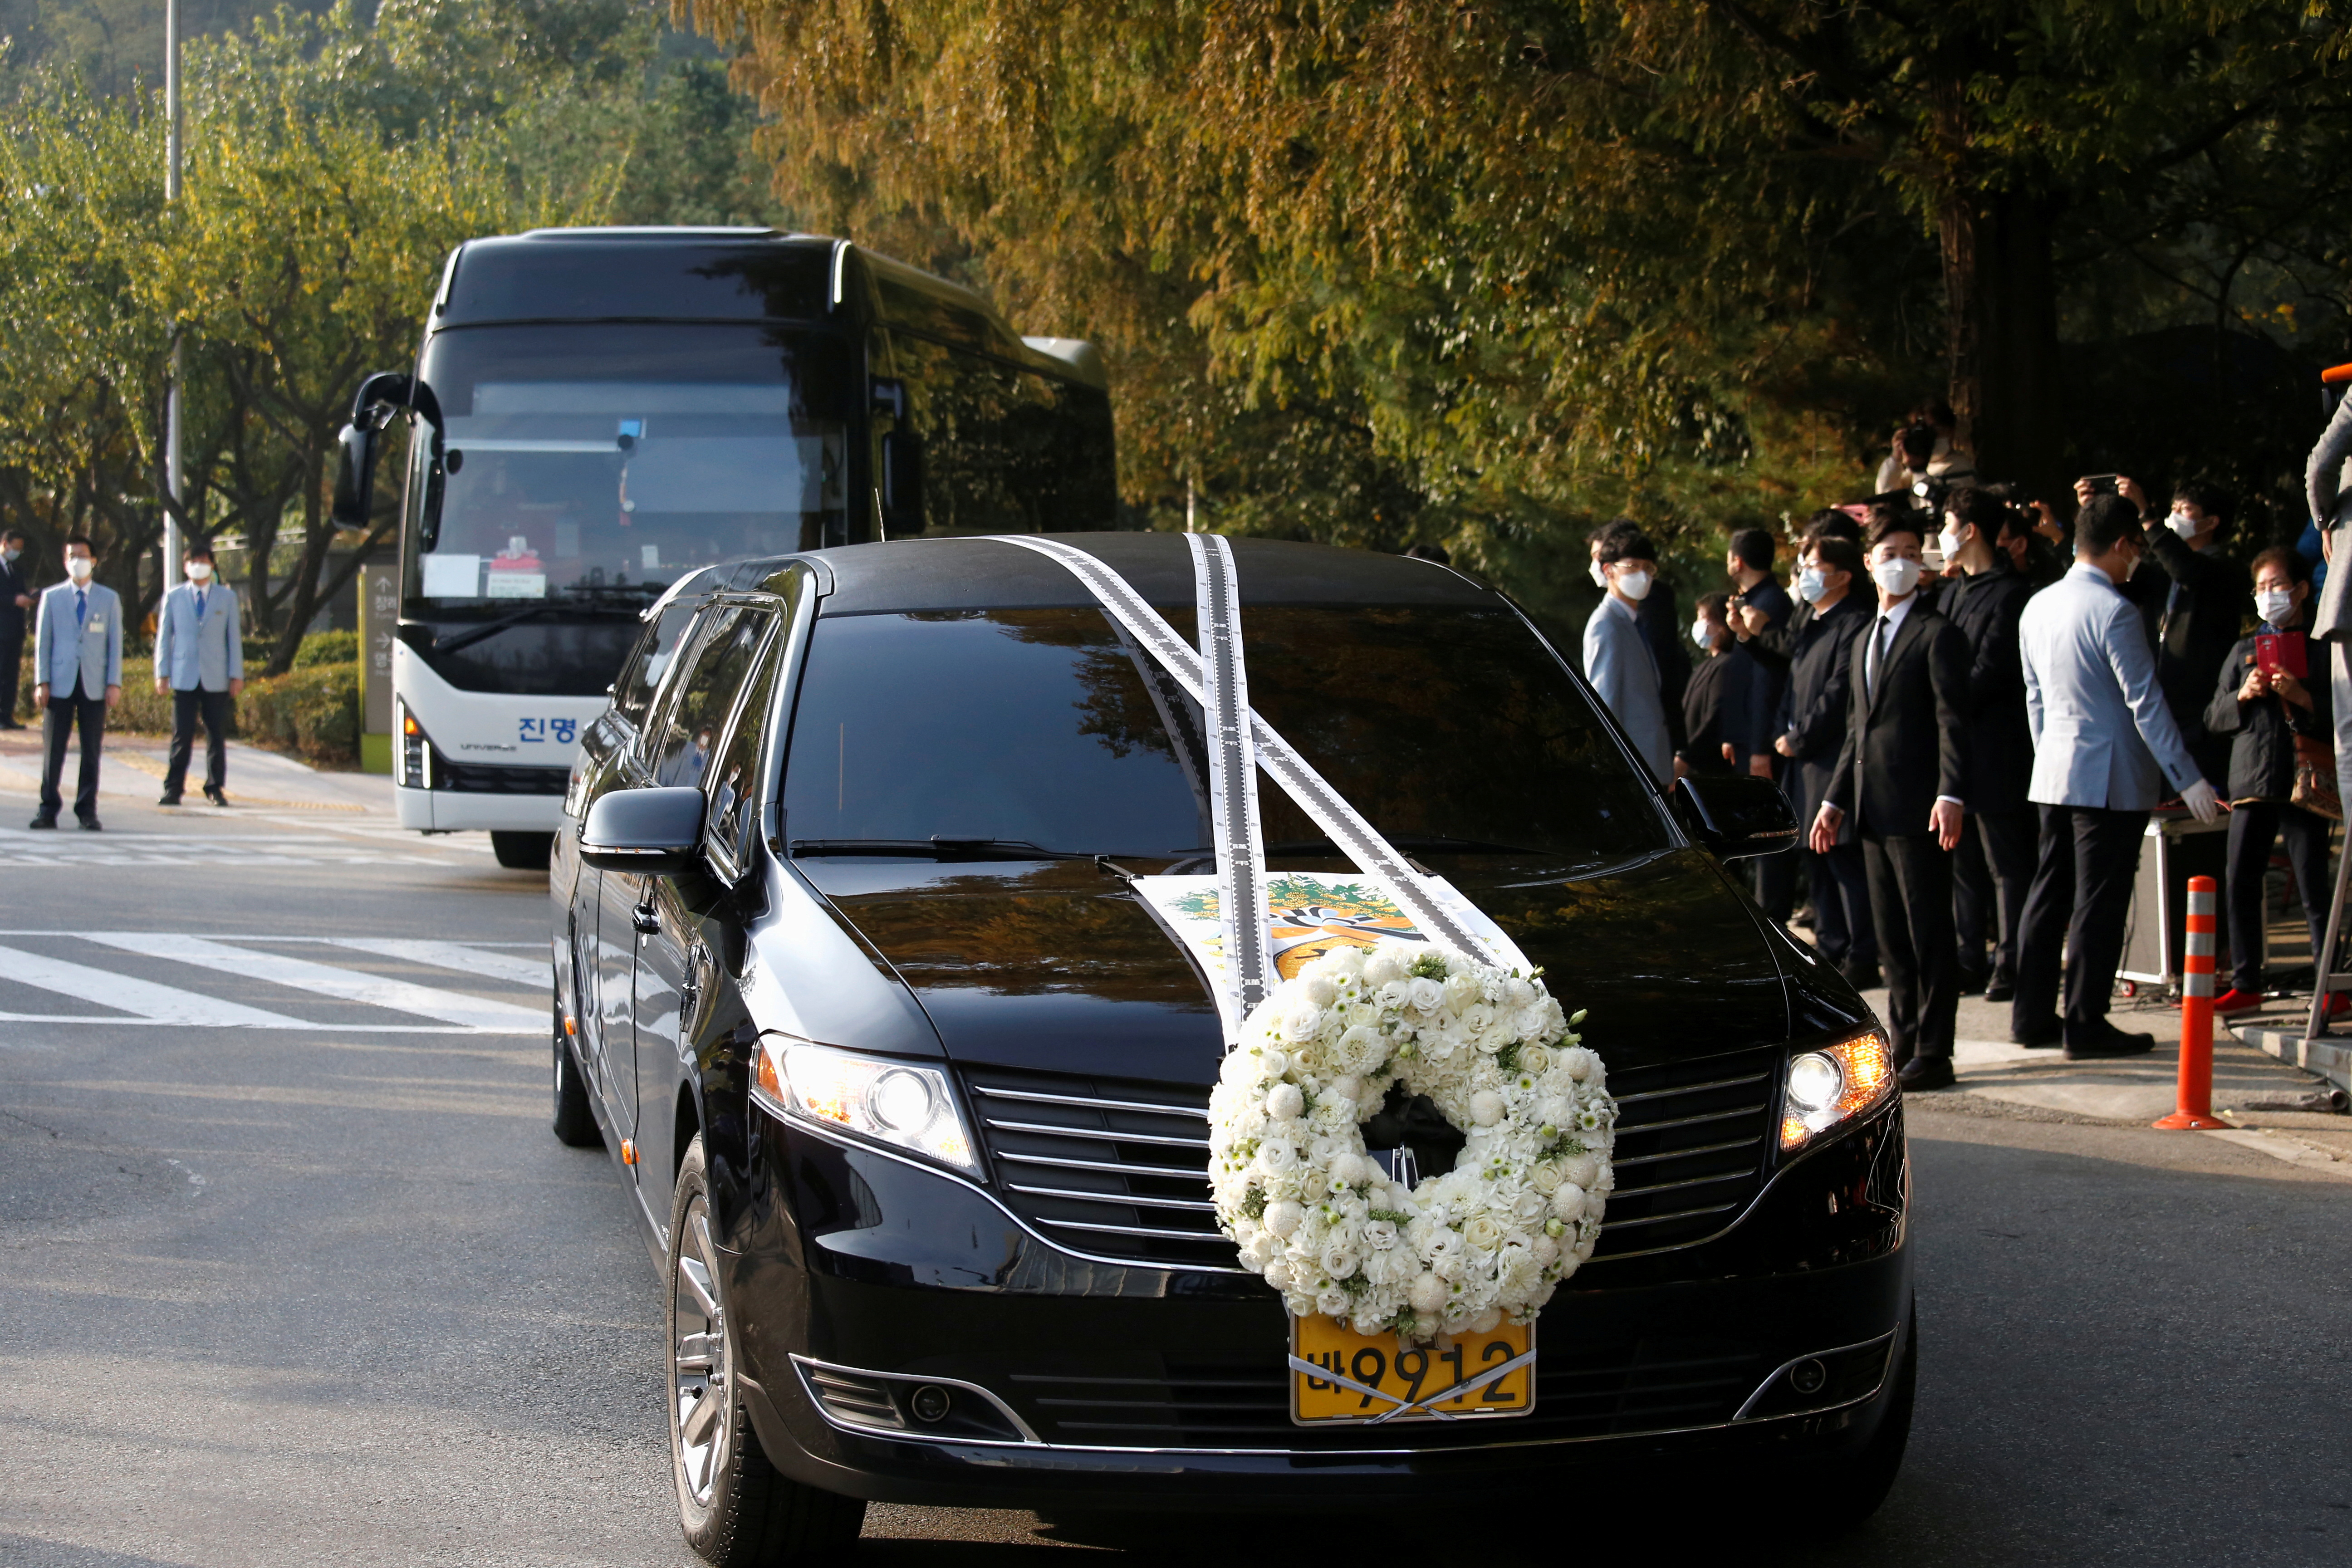 A hearse carrying the body of Lee Kun-hee, leader of Samsung Group, travels at a hospital in Seoul, South Korea, October 28, 2020. REUTERS/Heo Ran/File Photo